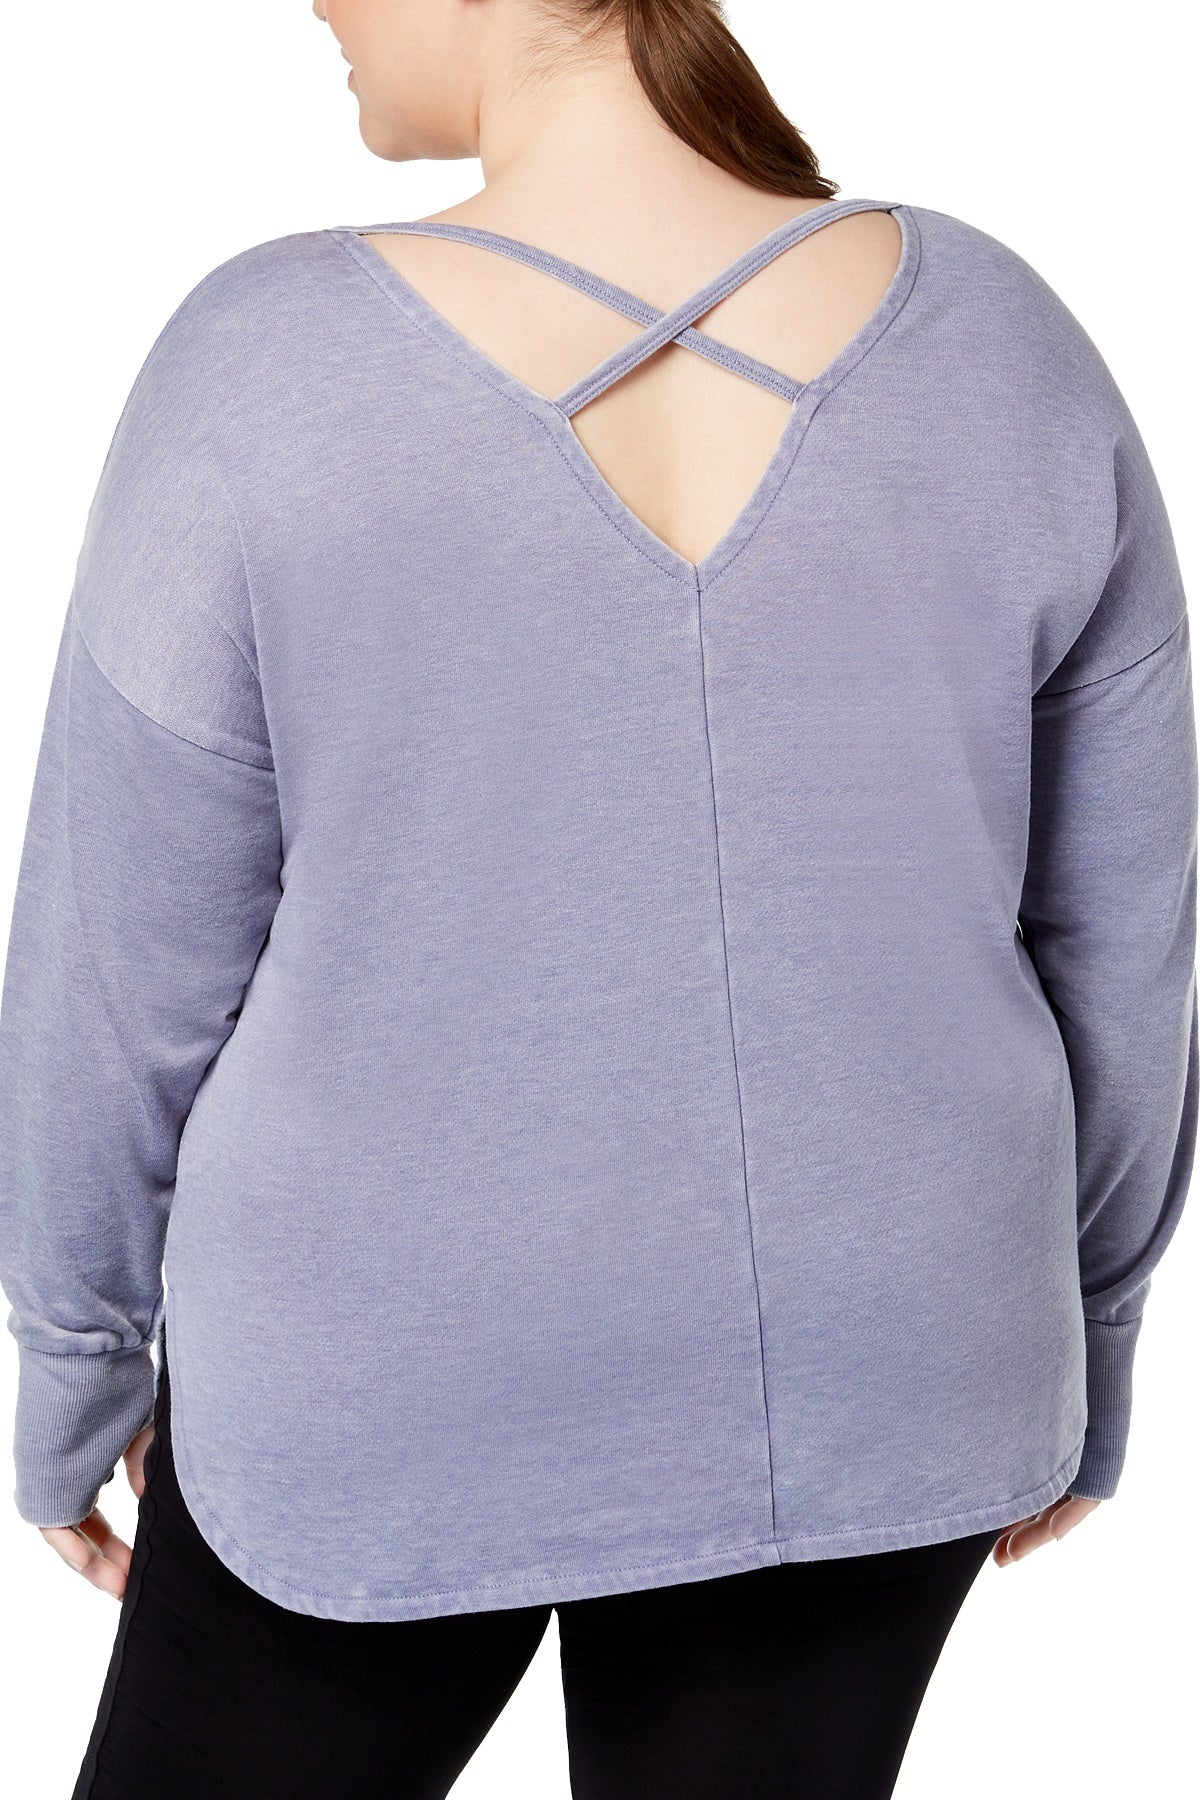 Ideology PLUS Infinity-Blue Graphic Cross-Back Pullover